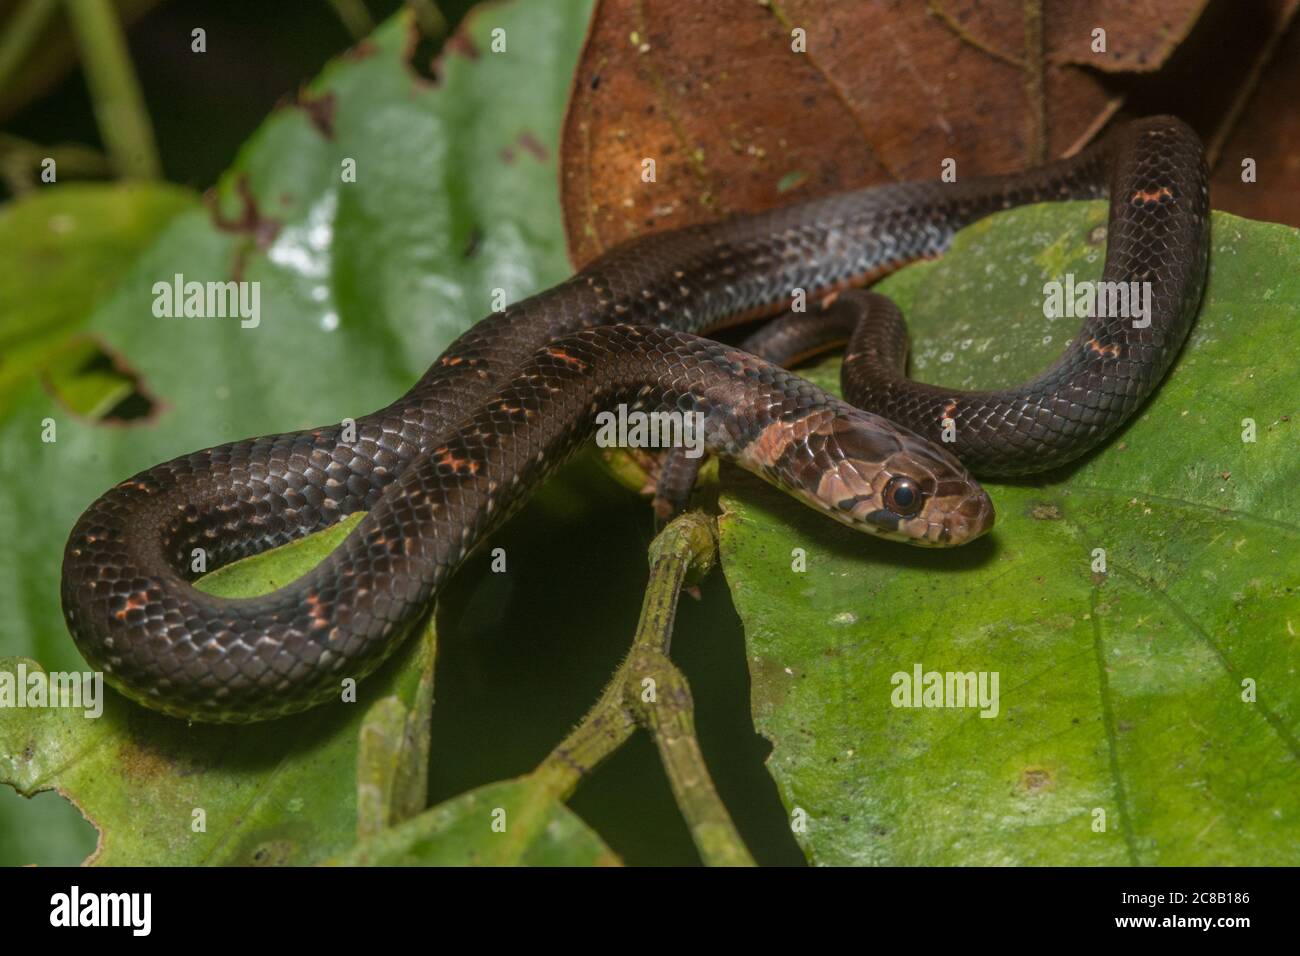 Jeweled Kukri Snake (Oligodon everetti) a small nonvenomous species of snake that lives in the rainforest of Borneo. Stock Photo